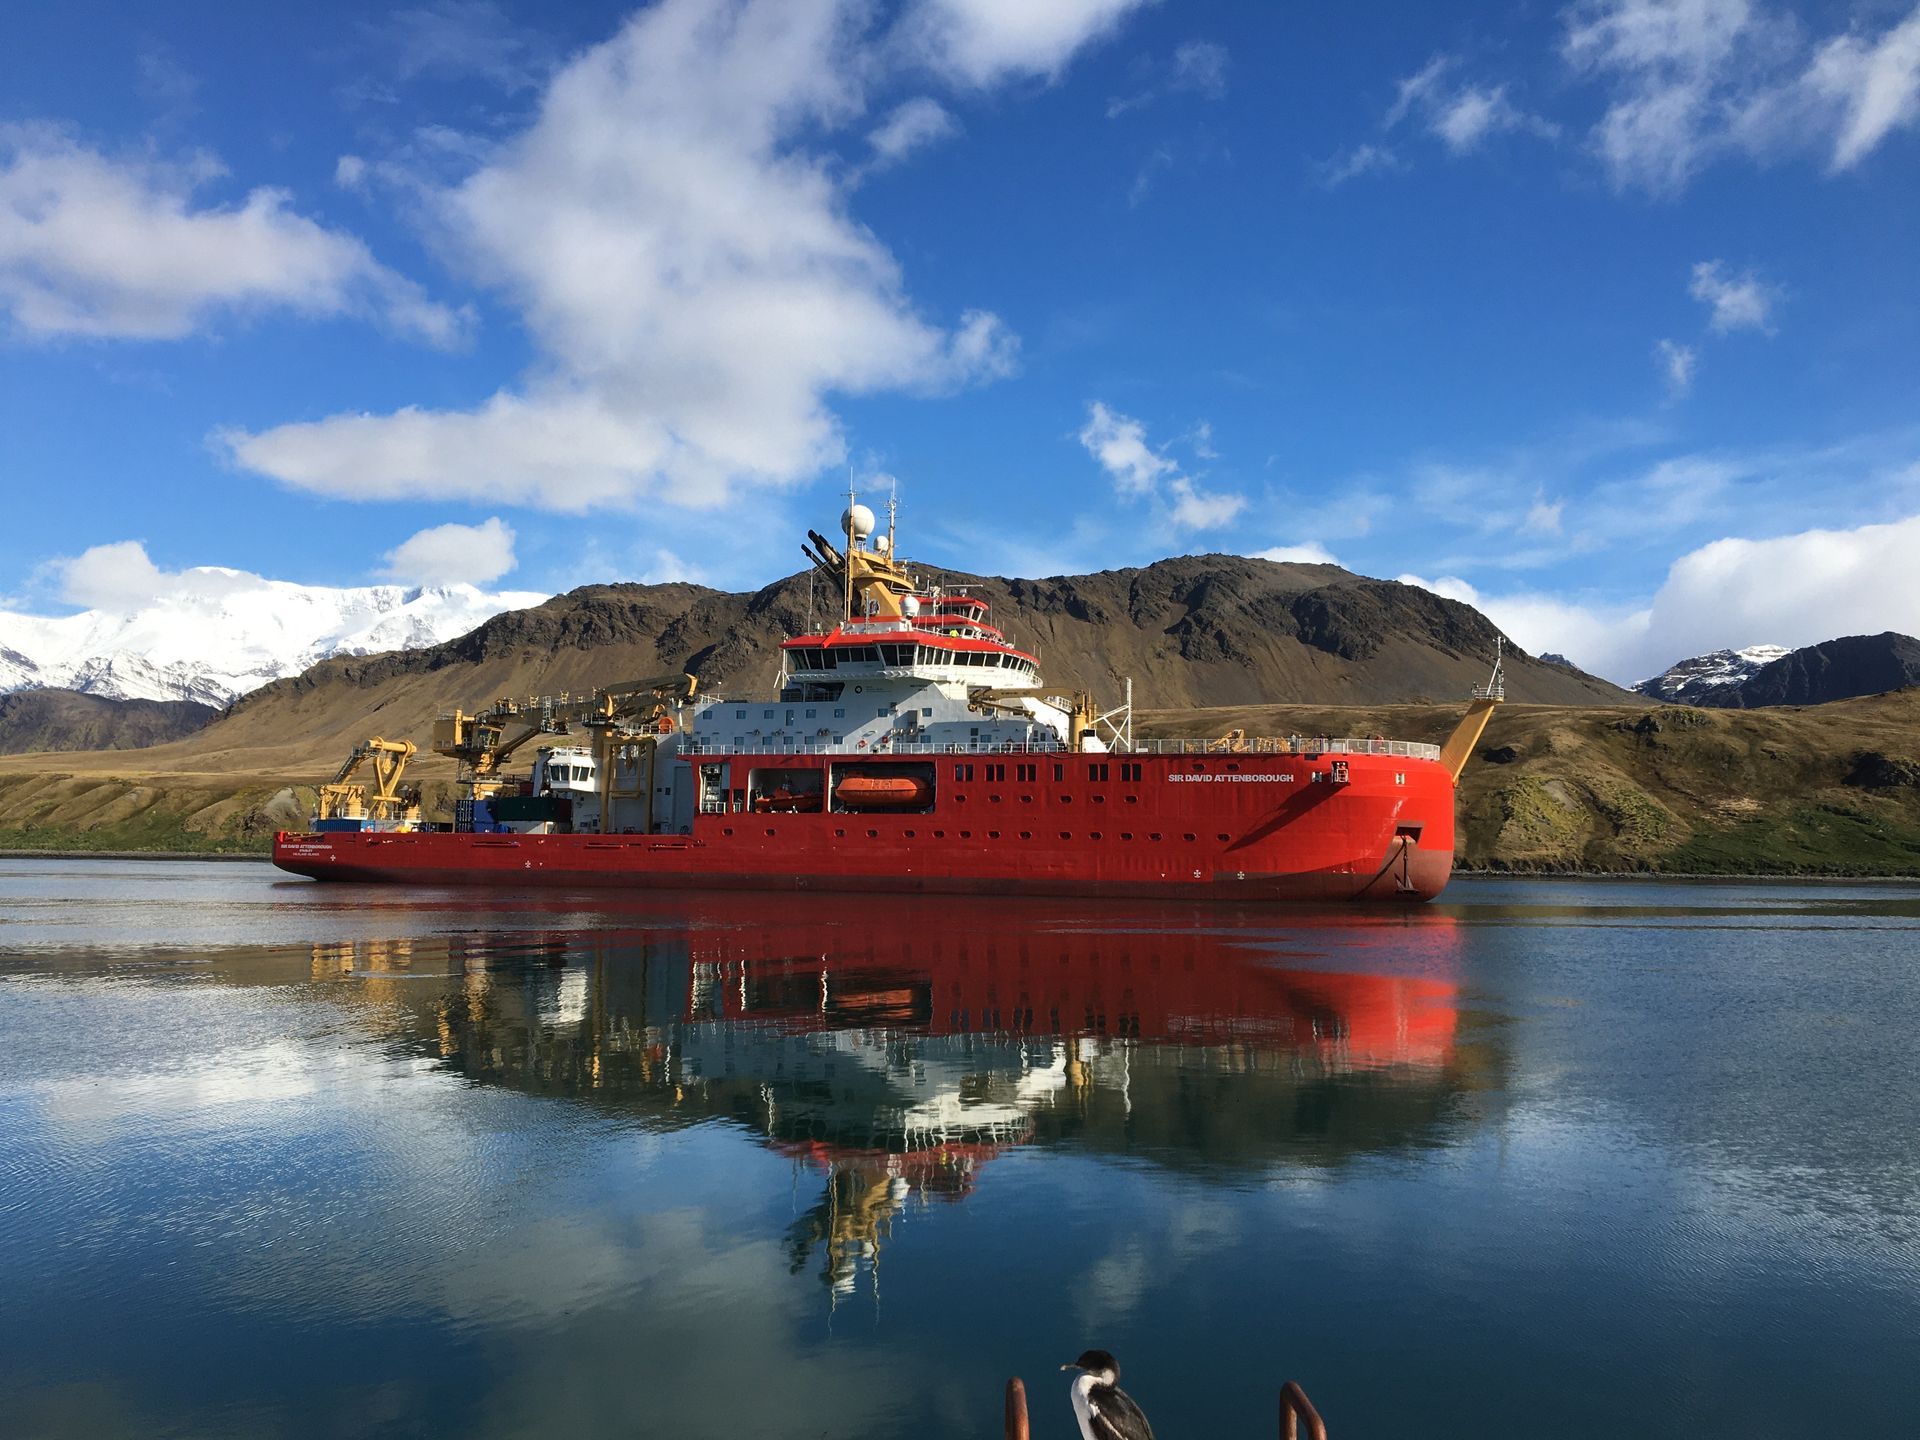 Welcome RRS Sir David Attenborough on her first visit to King Edward Point